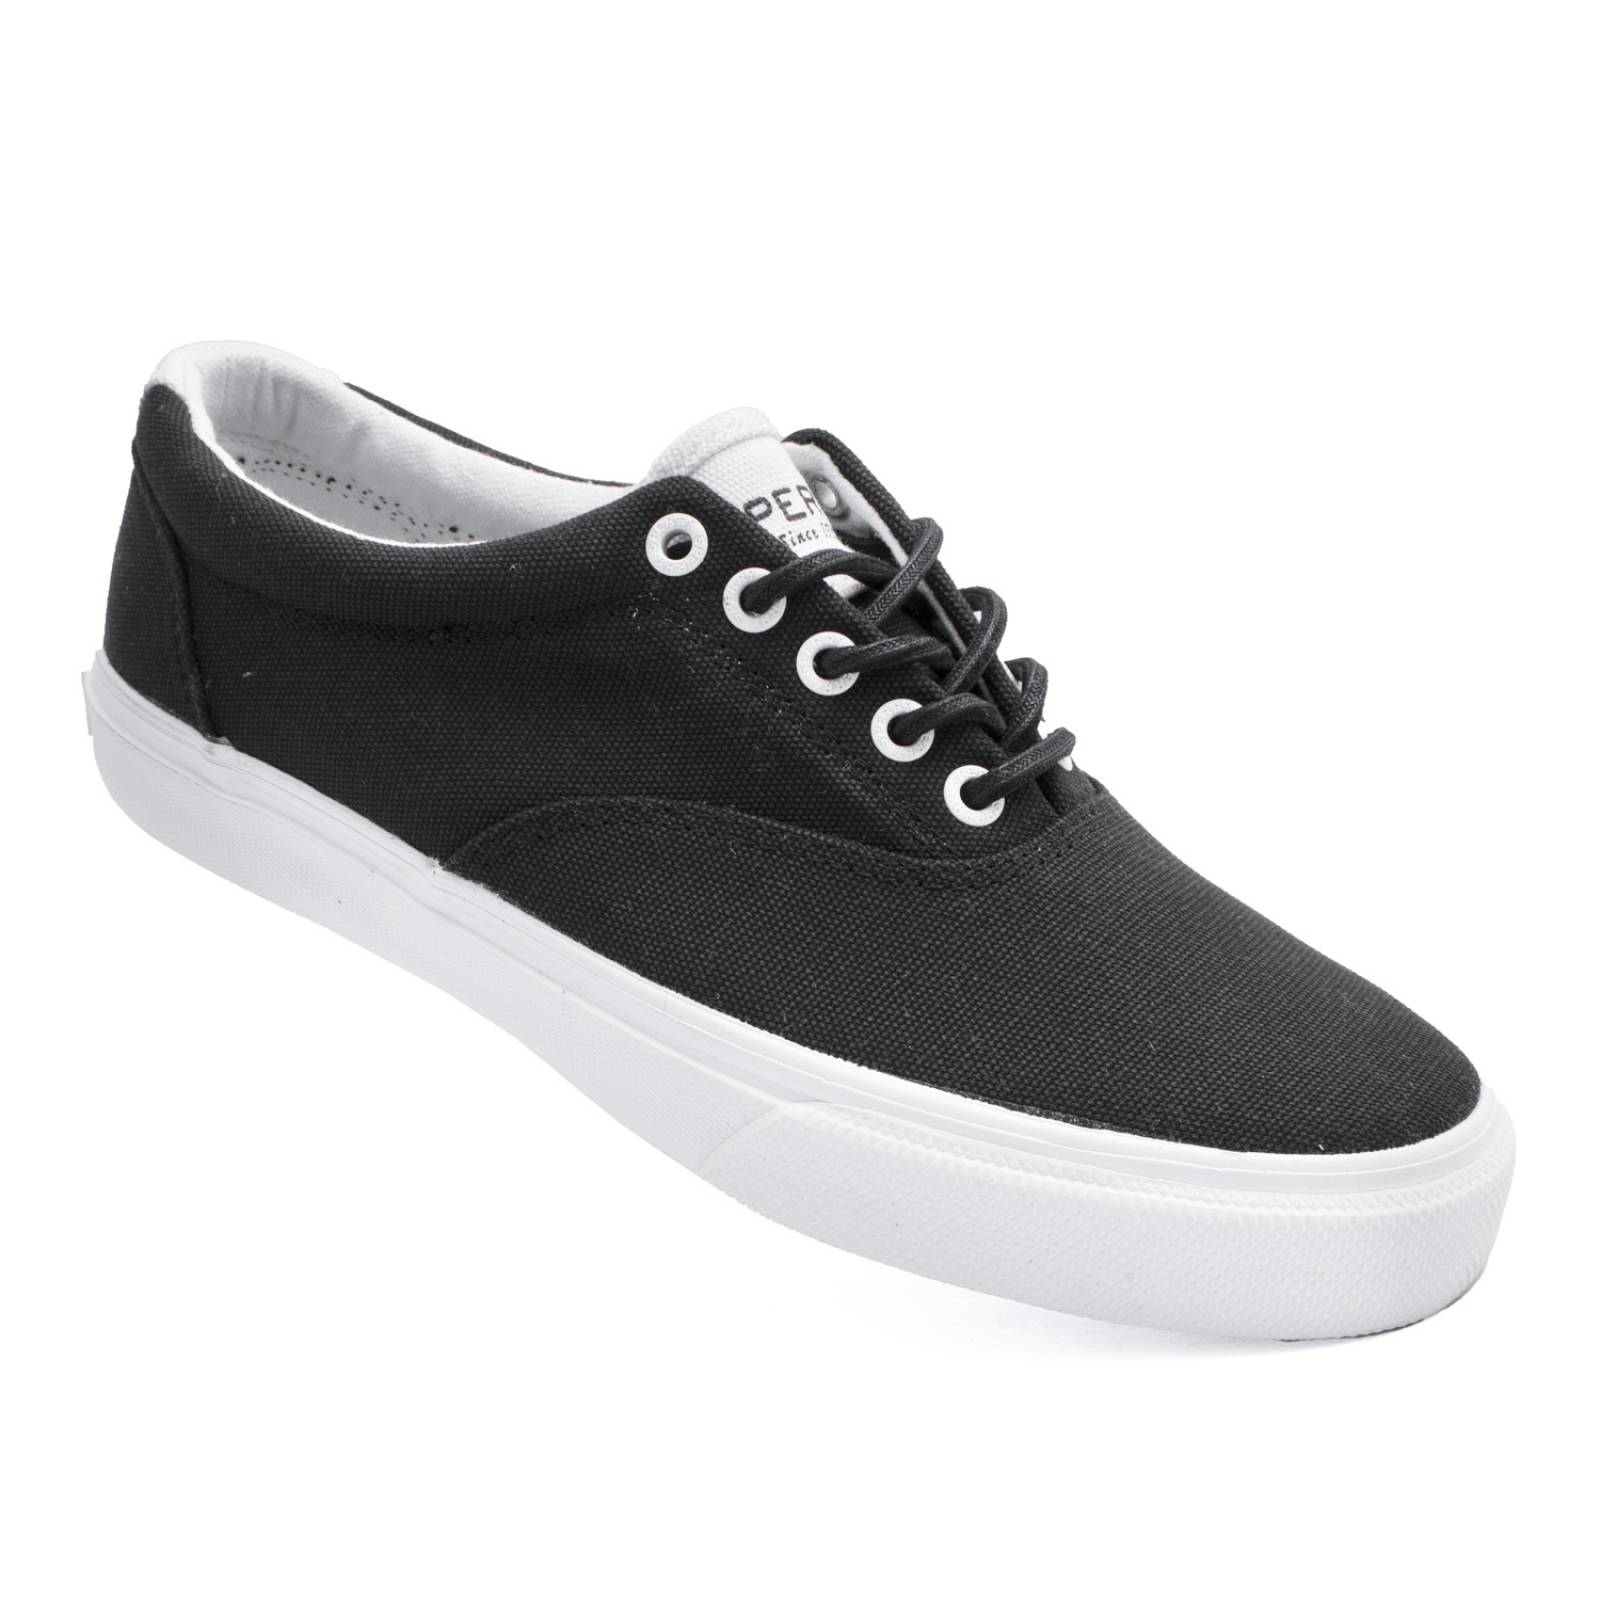 Tenis SPERRY Para Hombre Casuales Color Negro Modelo STS12811 SPERRY Hombre  Striper Ll Negro STS12811